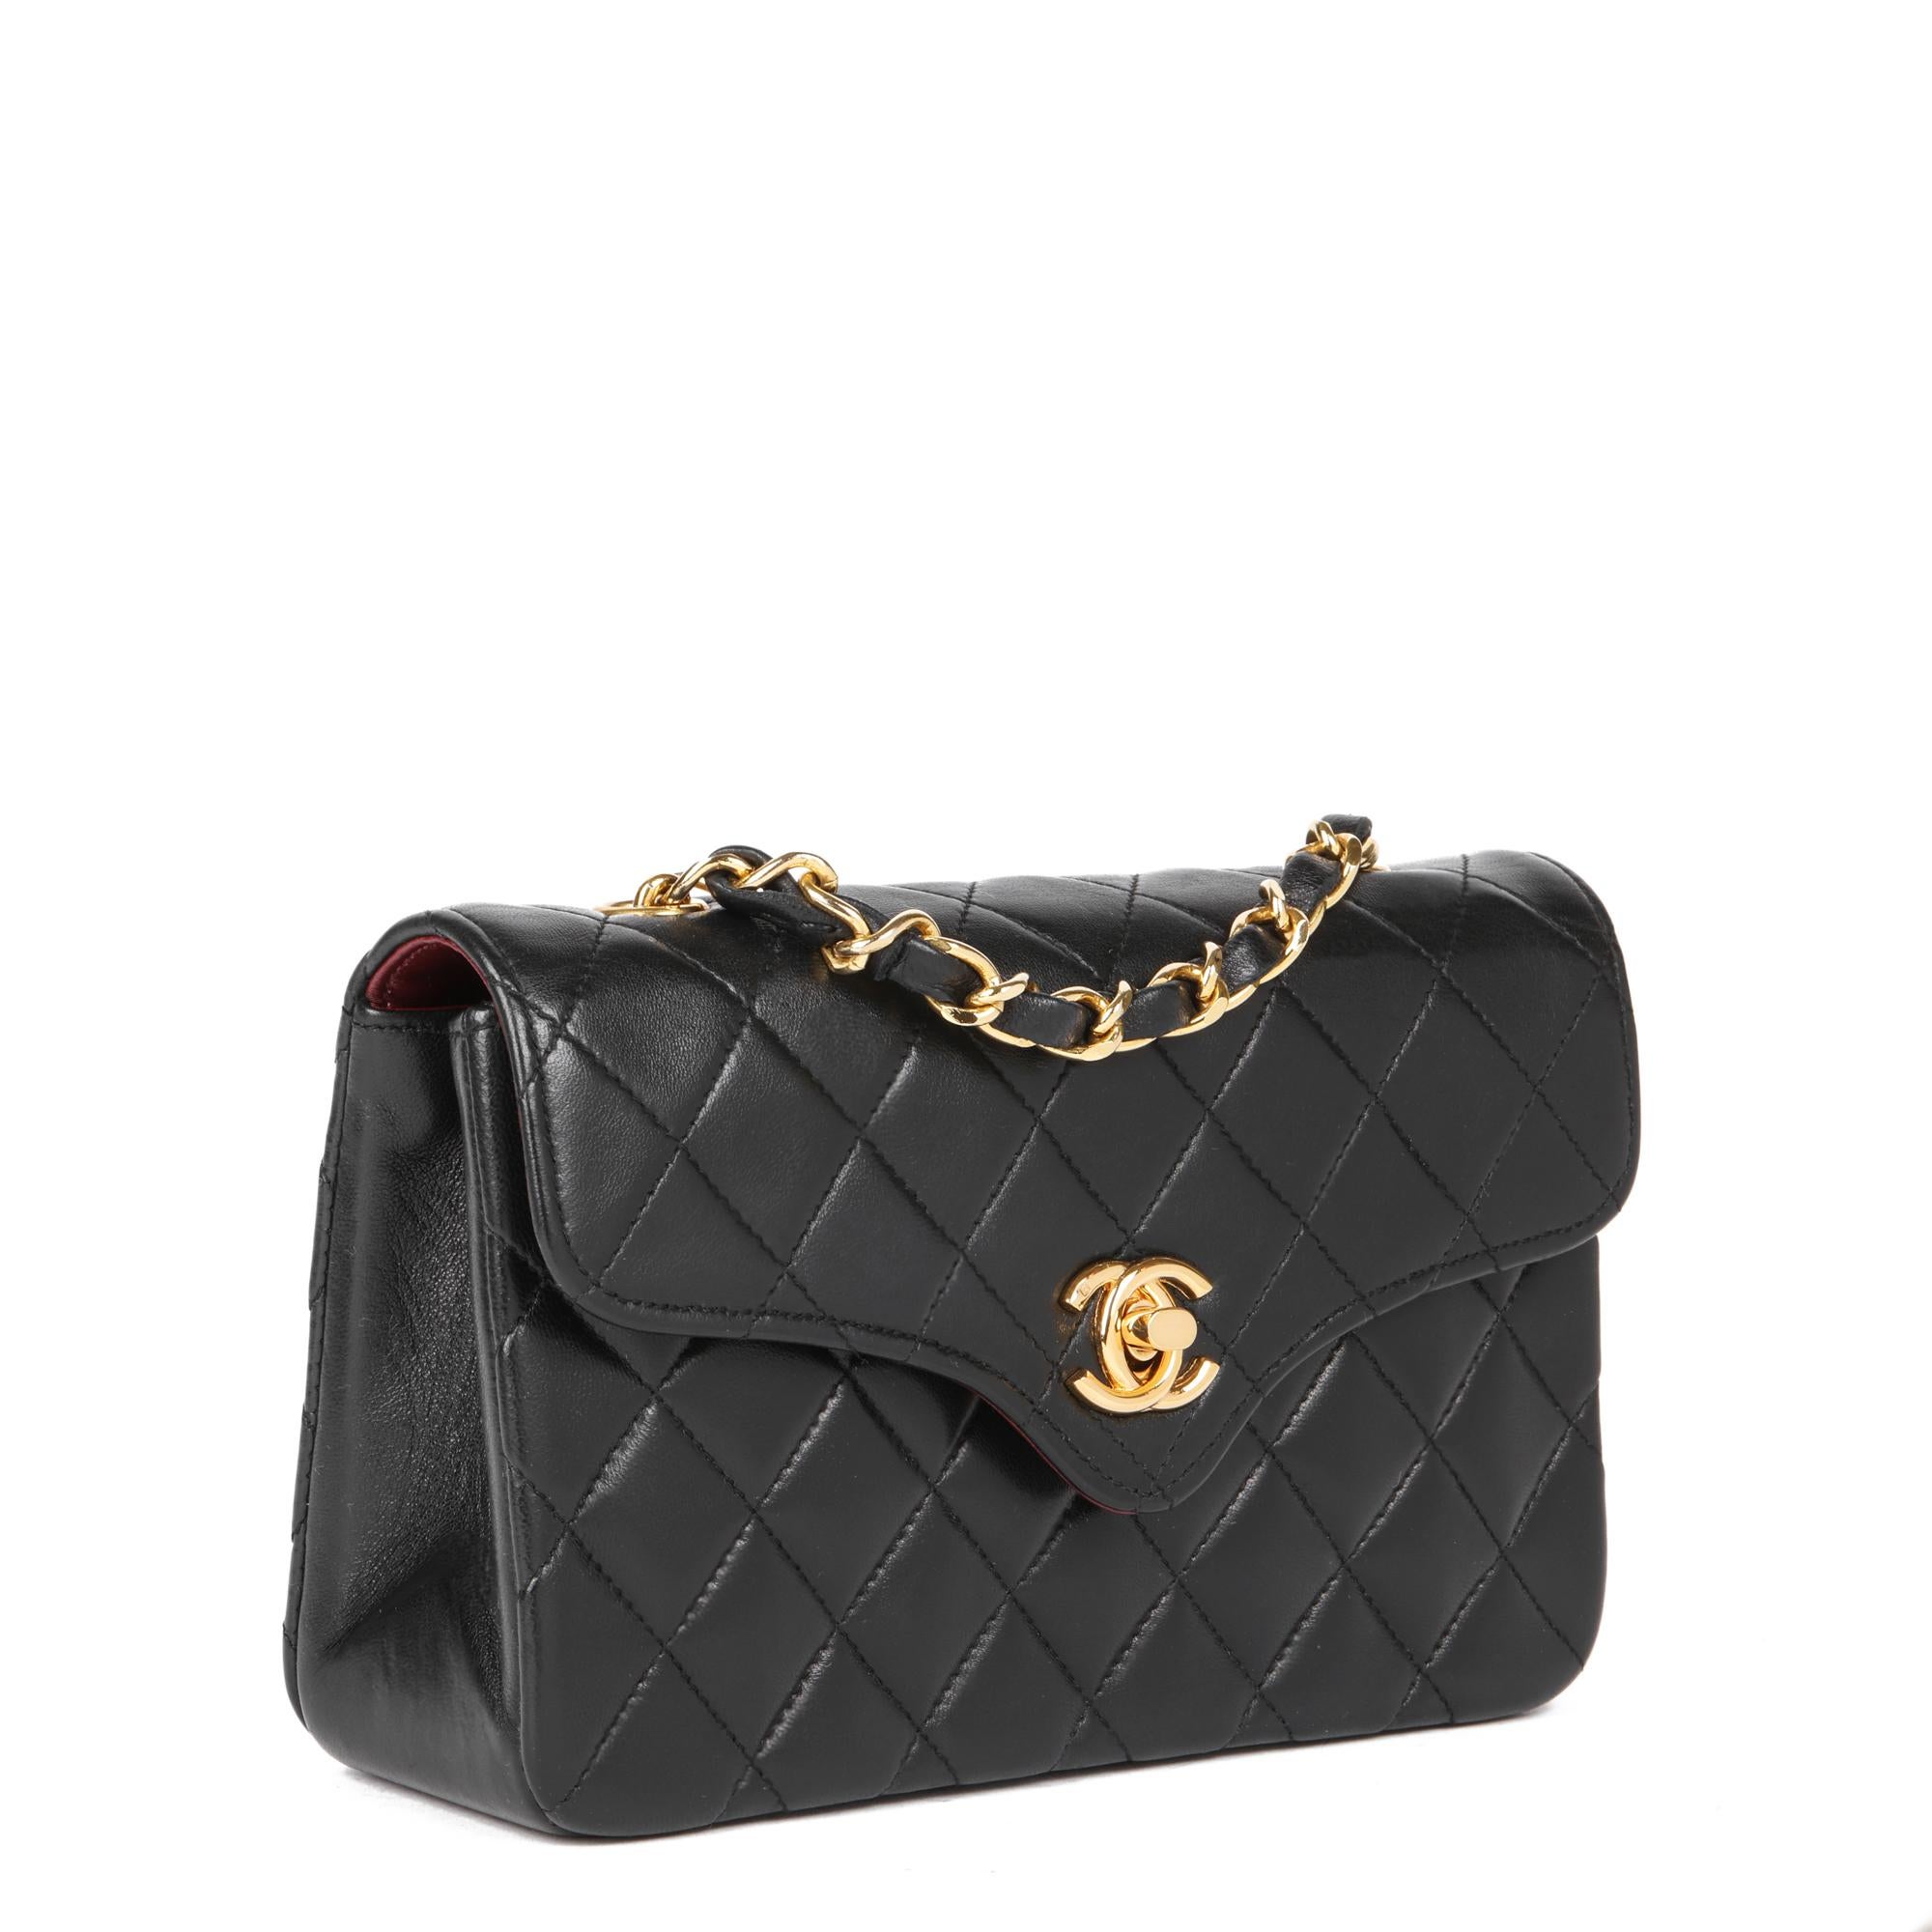 CHANEL
Black Quilted Lambskin Vintage Rectangular Mini Flap Bag

Xupes Reference: HB4894
Serial Number: 972012
Age (Circa): 1989
Accompanied By: Chanel Dust Bag, Authenticity Card
Authenticity Details: Authenticity Card, Serial Sticker (Made in